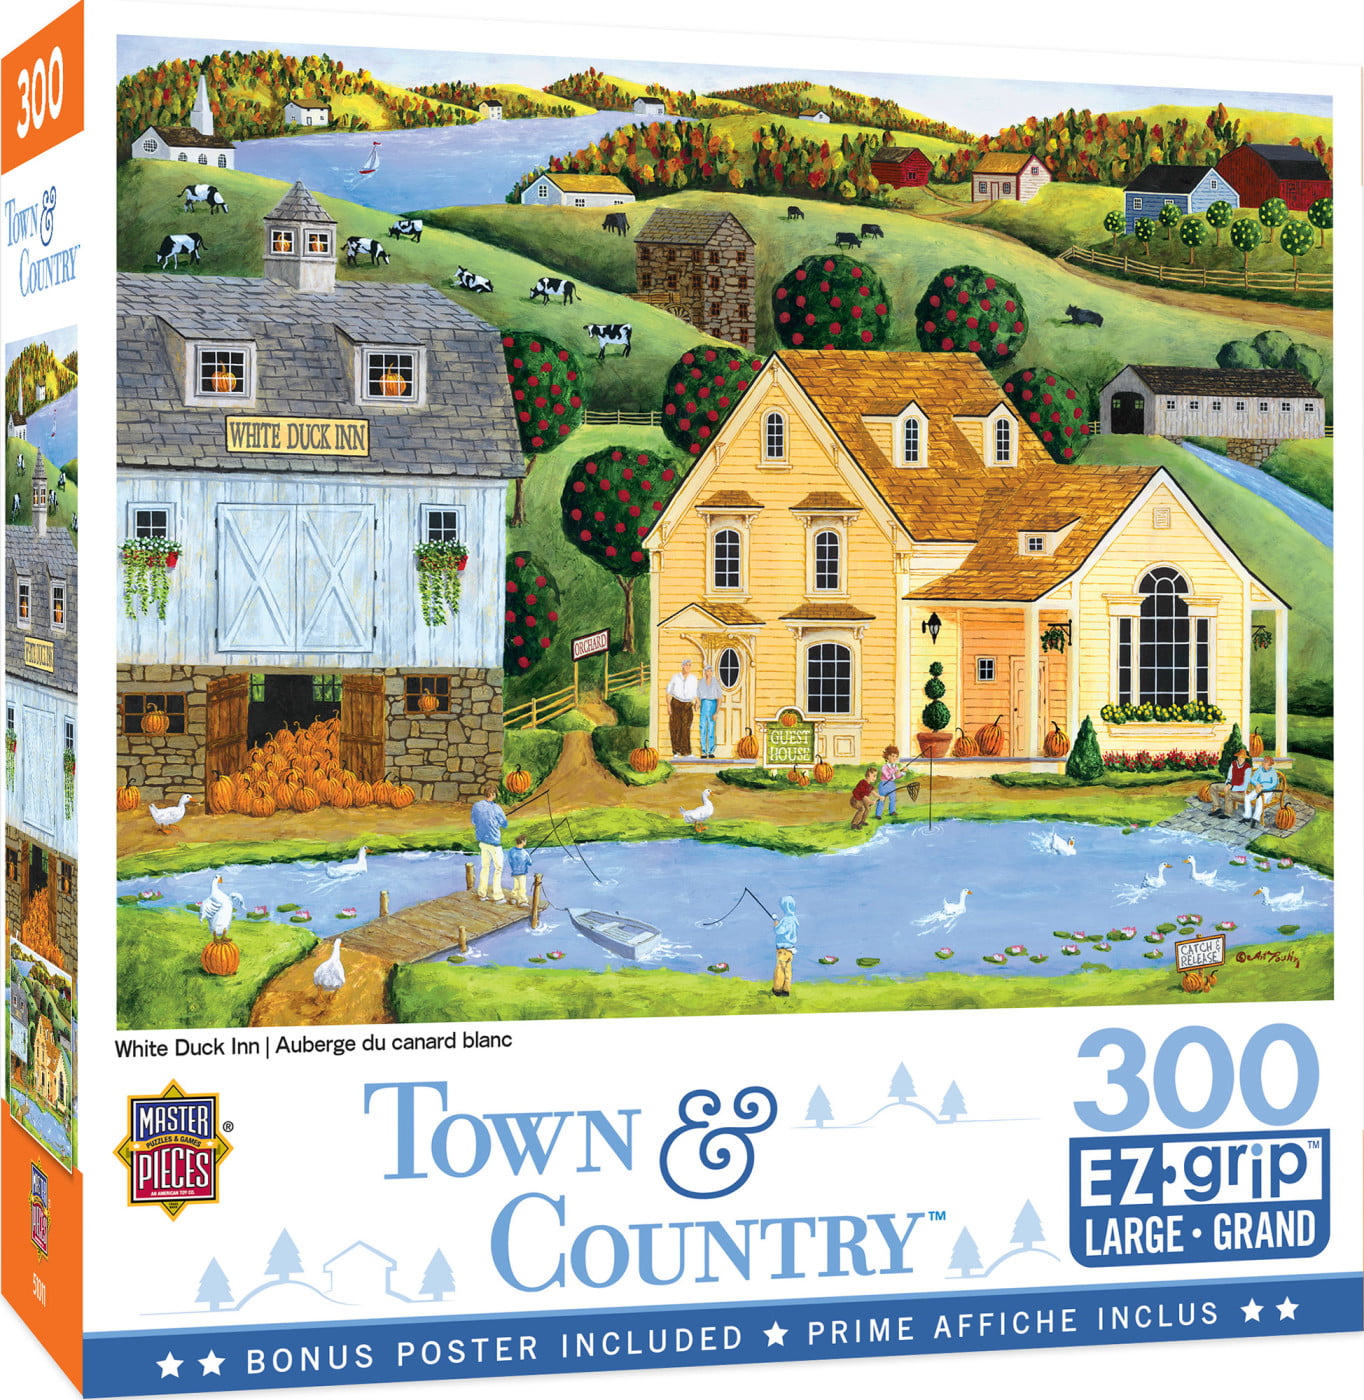 Bonnie White Canaan Fire Company 300 Piece Jigsaw Puzzle in Bag 